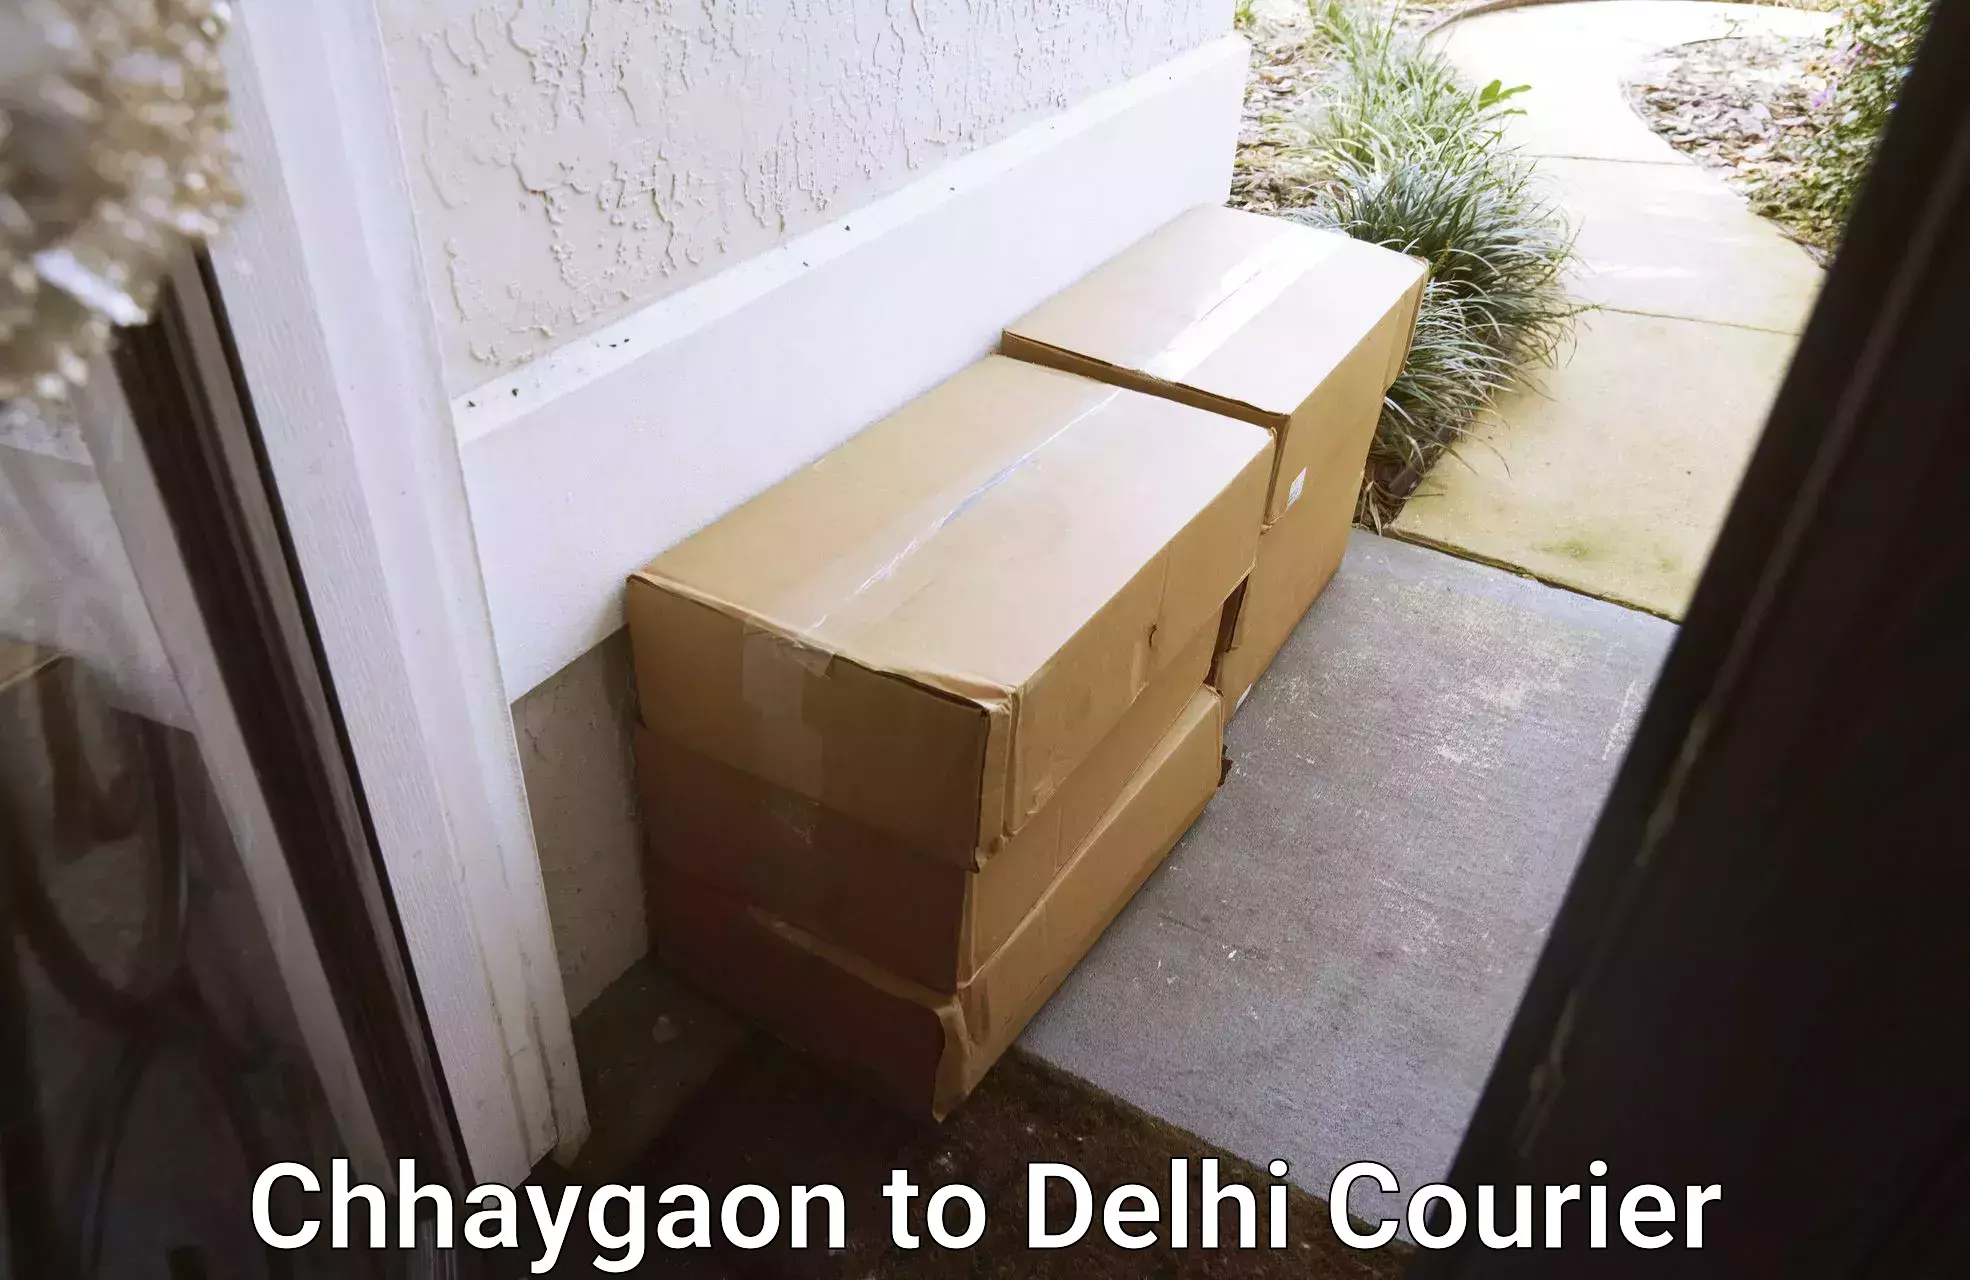 High-capacity parcel service Chhaygaon to University of Delhi